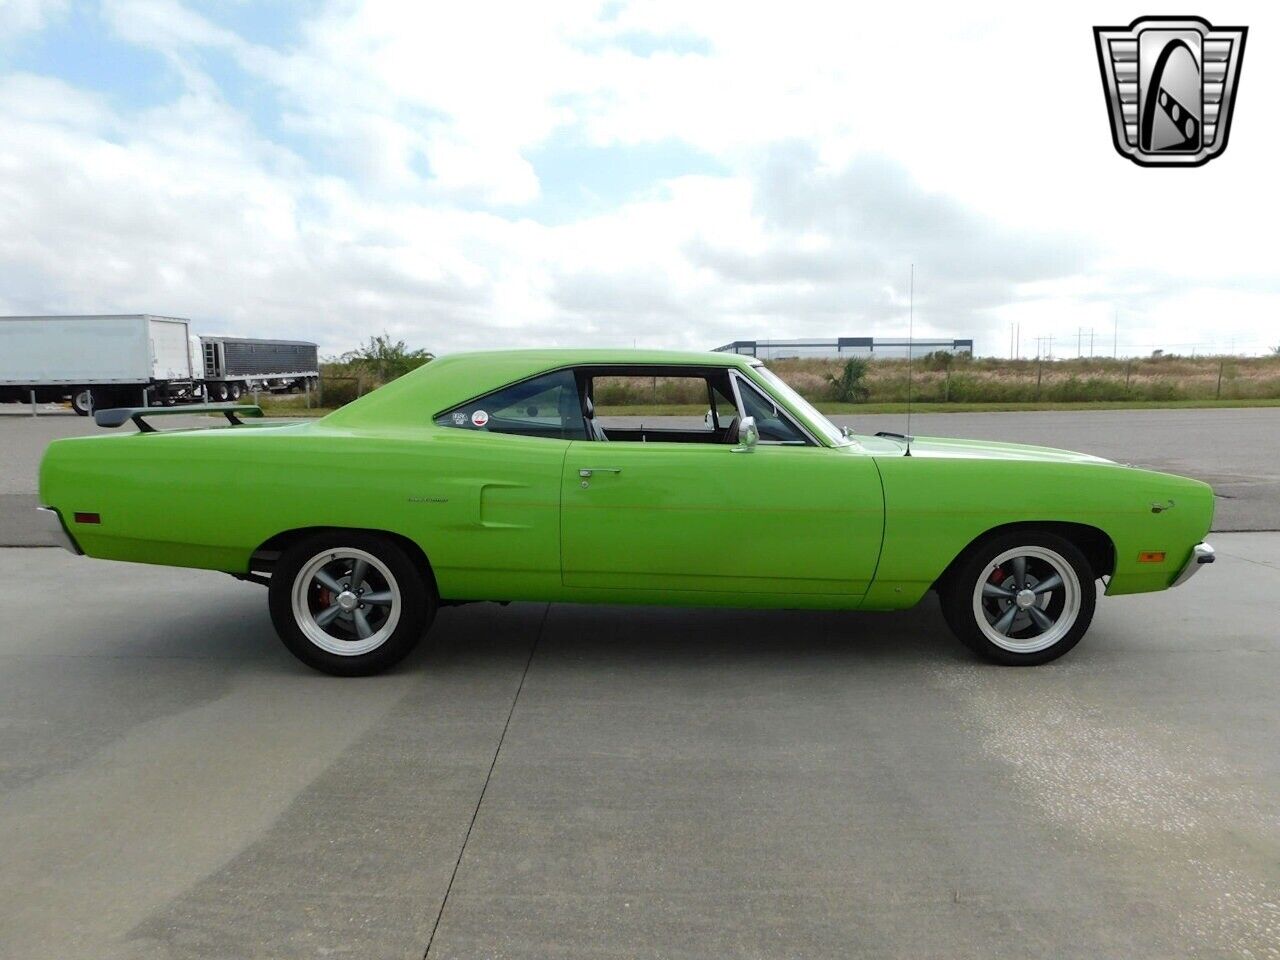 Lime Green 1970 Plymouth Satellite  440 CI V8 727 Automatic Available Now!